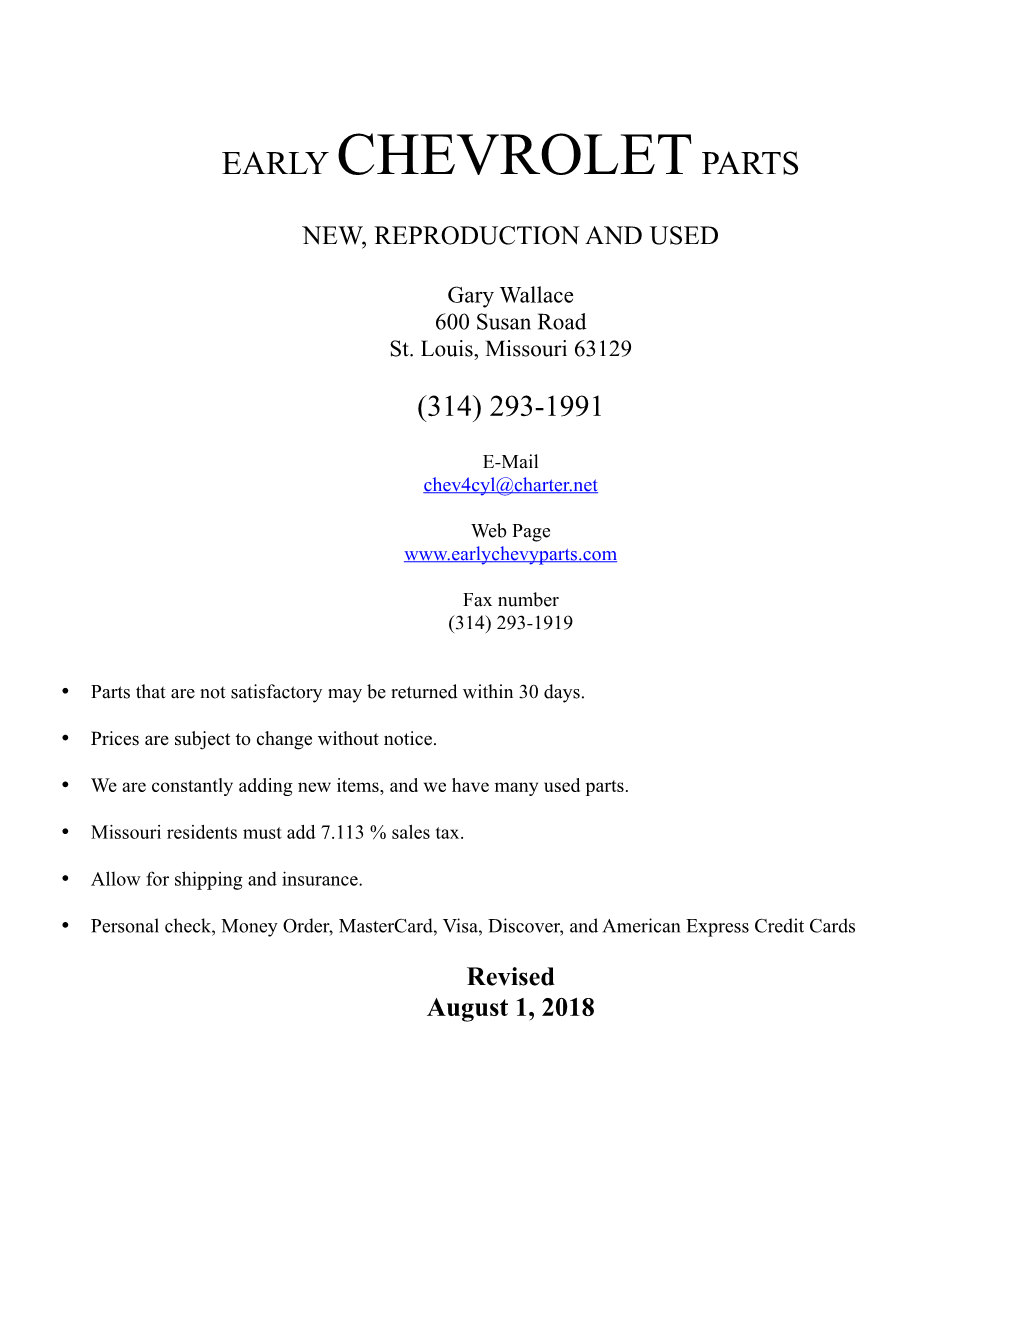 Early Chevrolet Parts